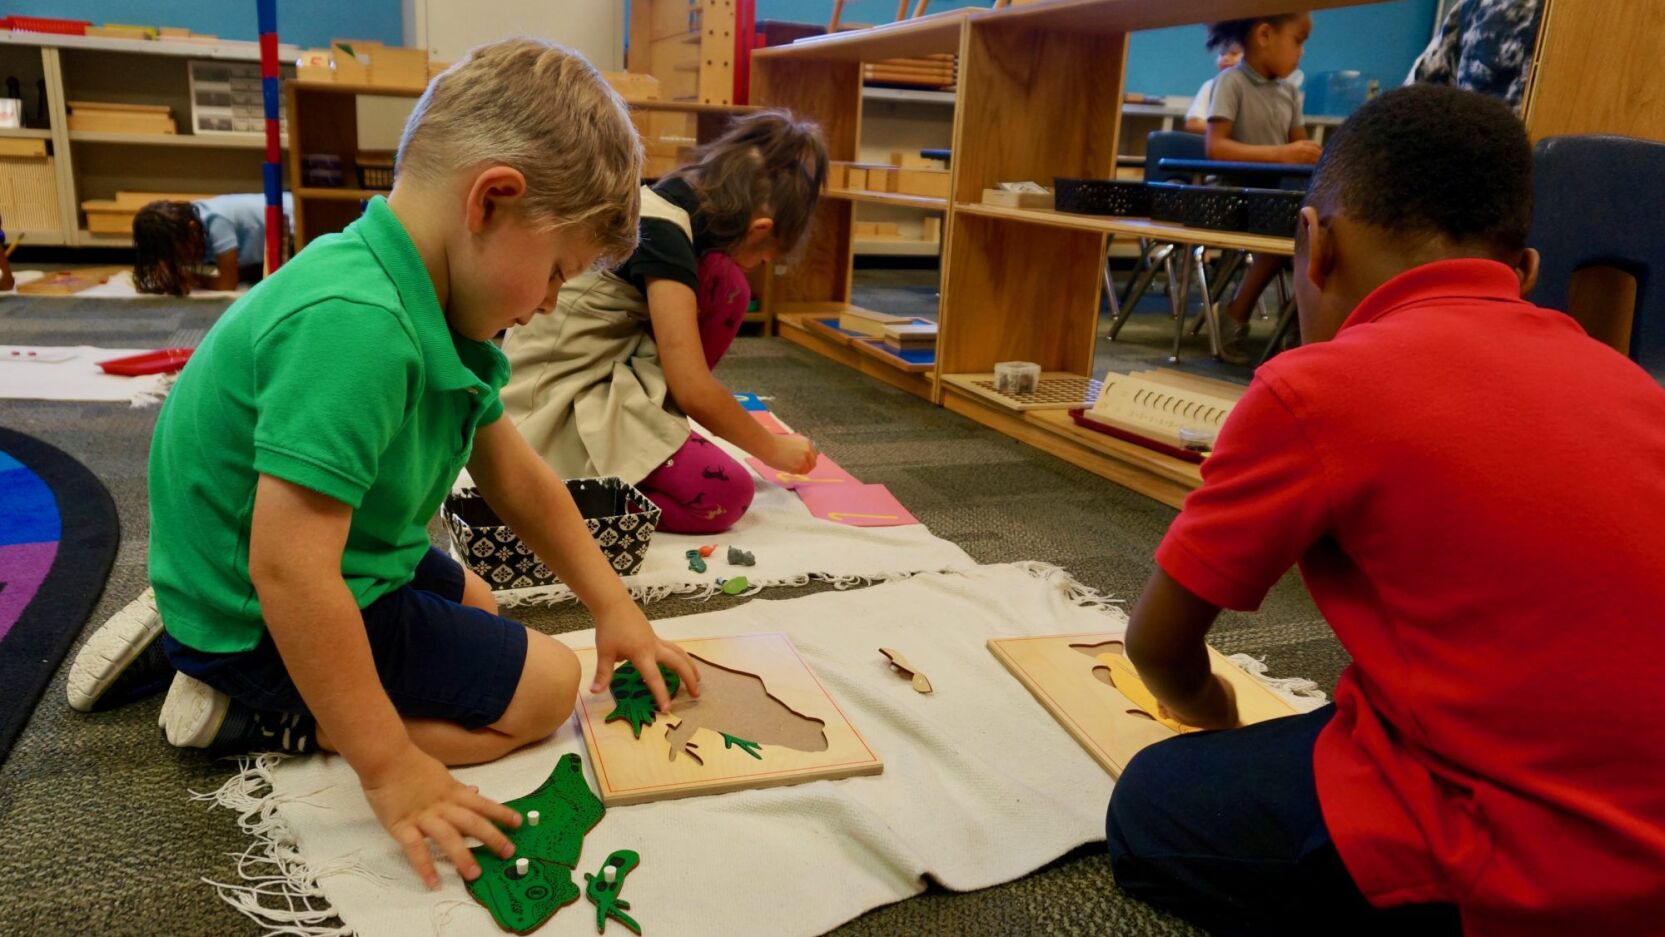 What Is a Montessori School? It is an institution that follows the methods established by Dr. Maria Montessori